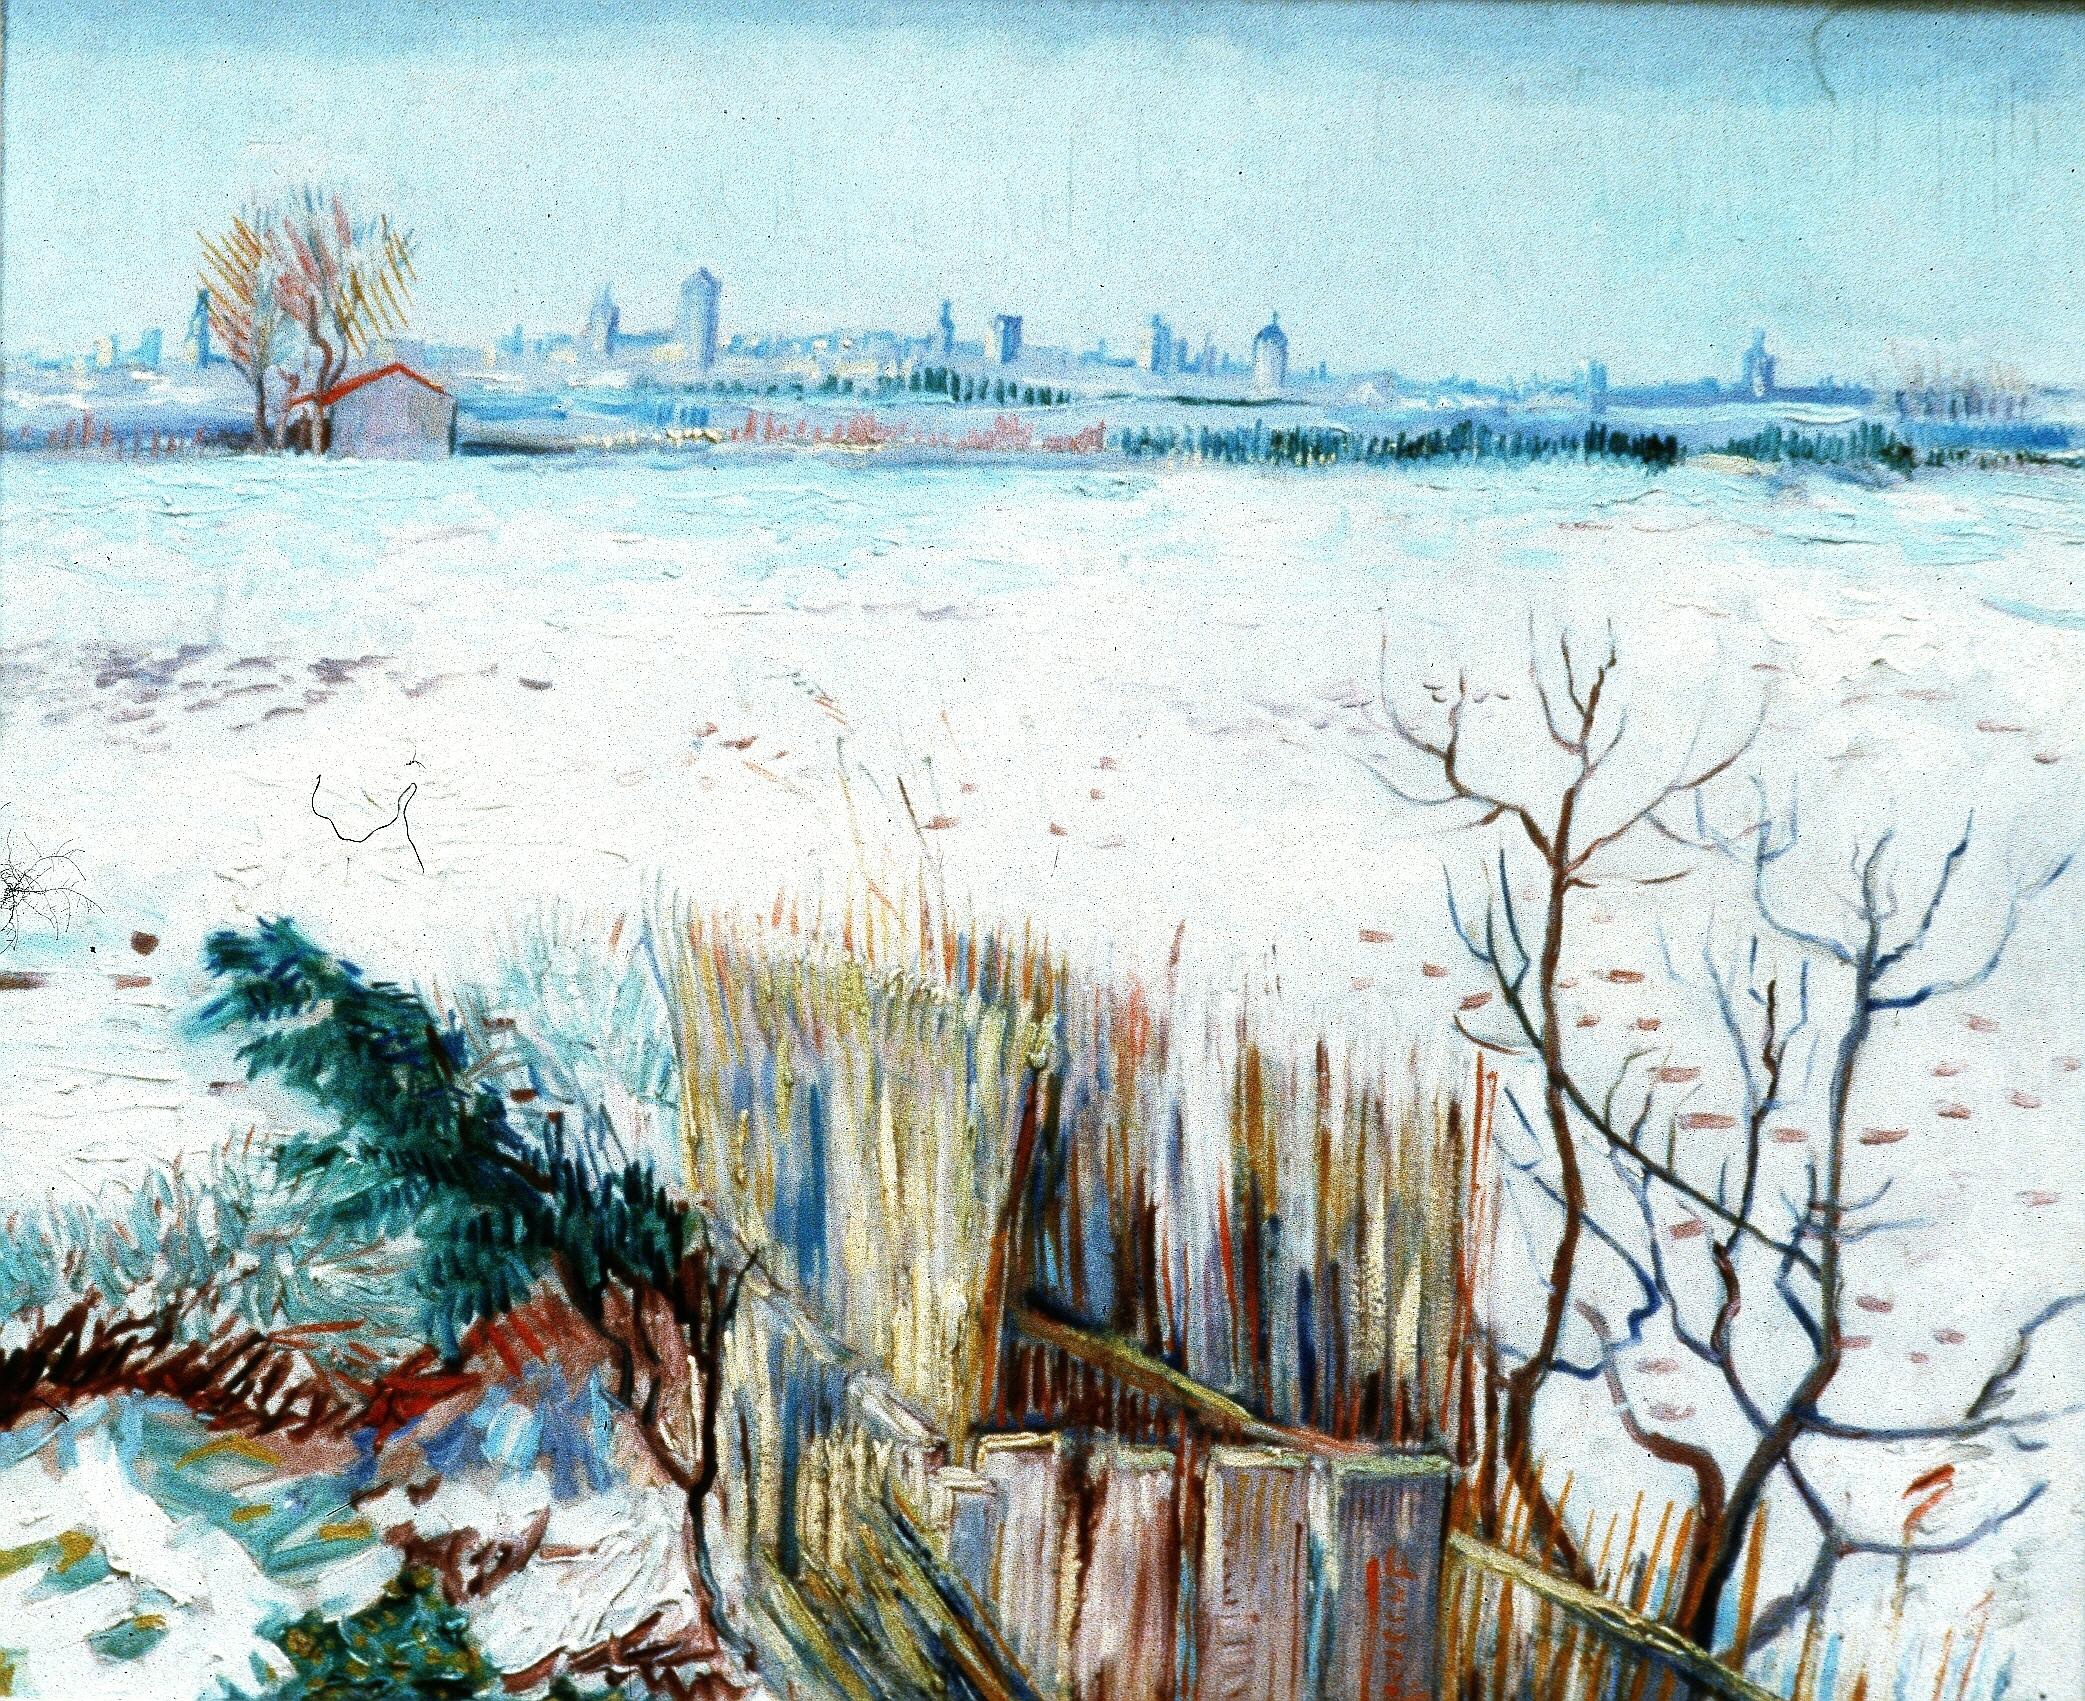 Snowy Landscape With Arles In The Background by Vincent Van Gogh